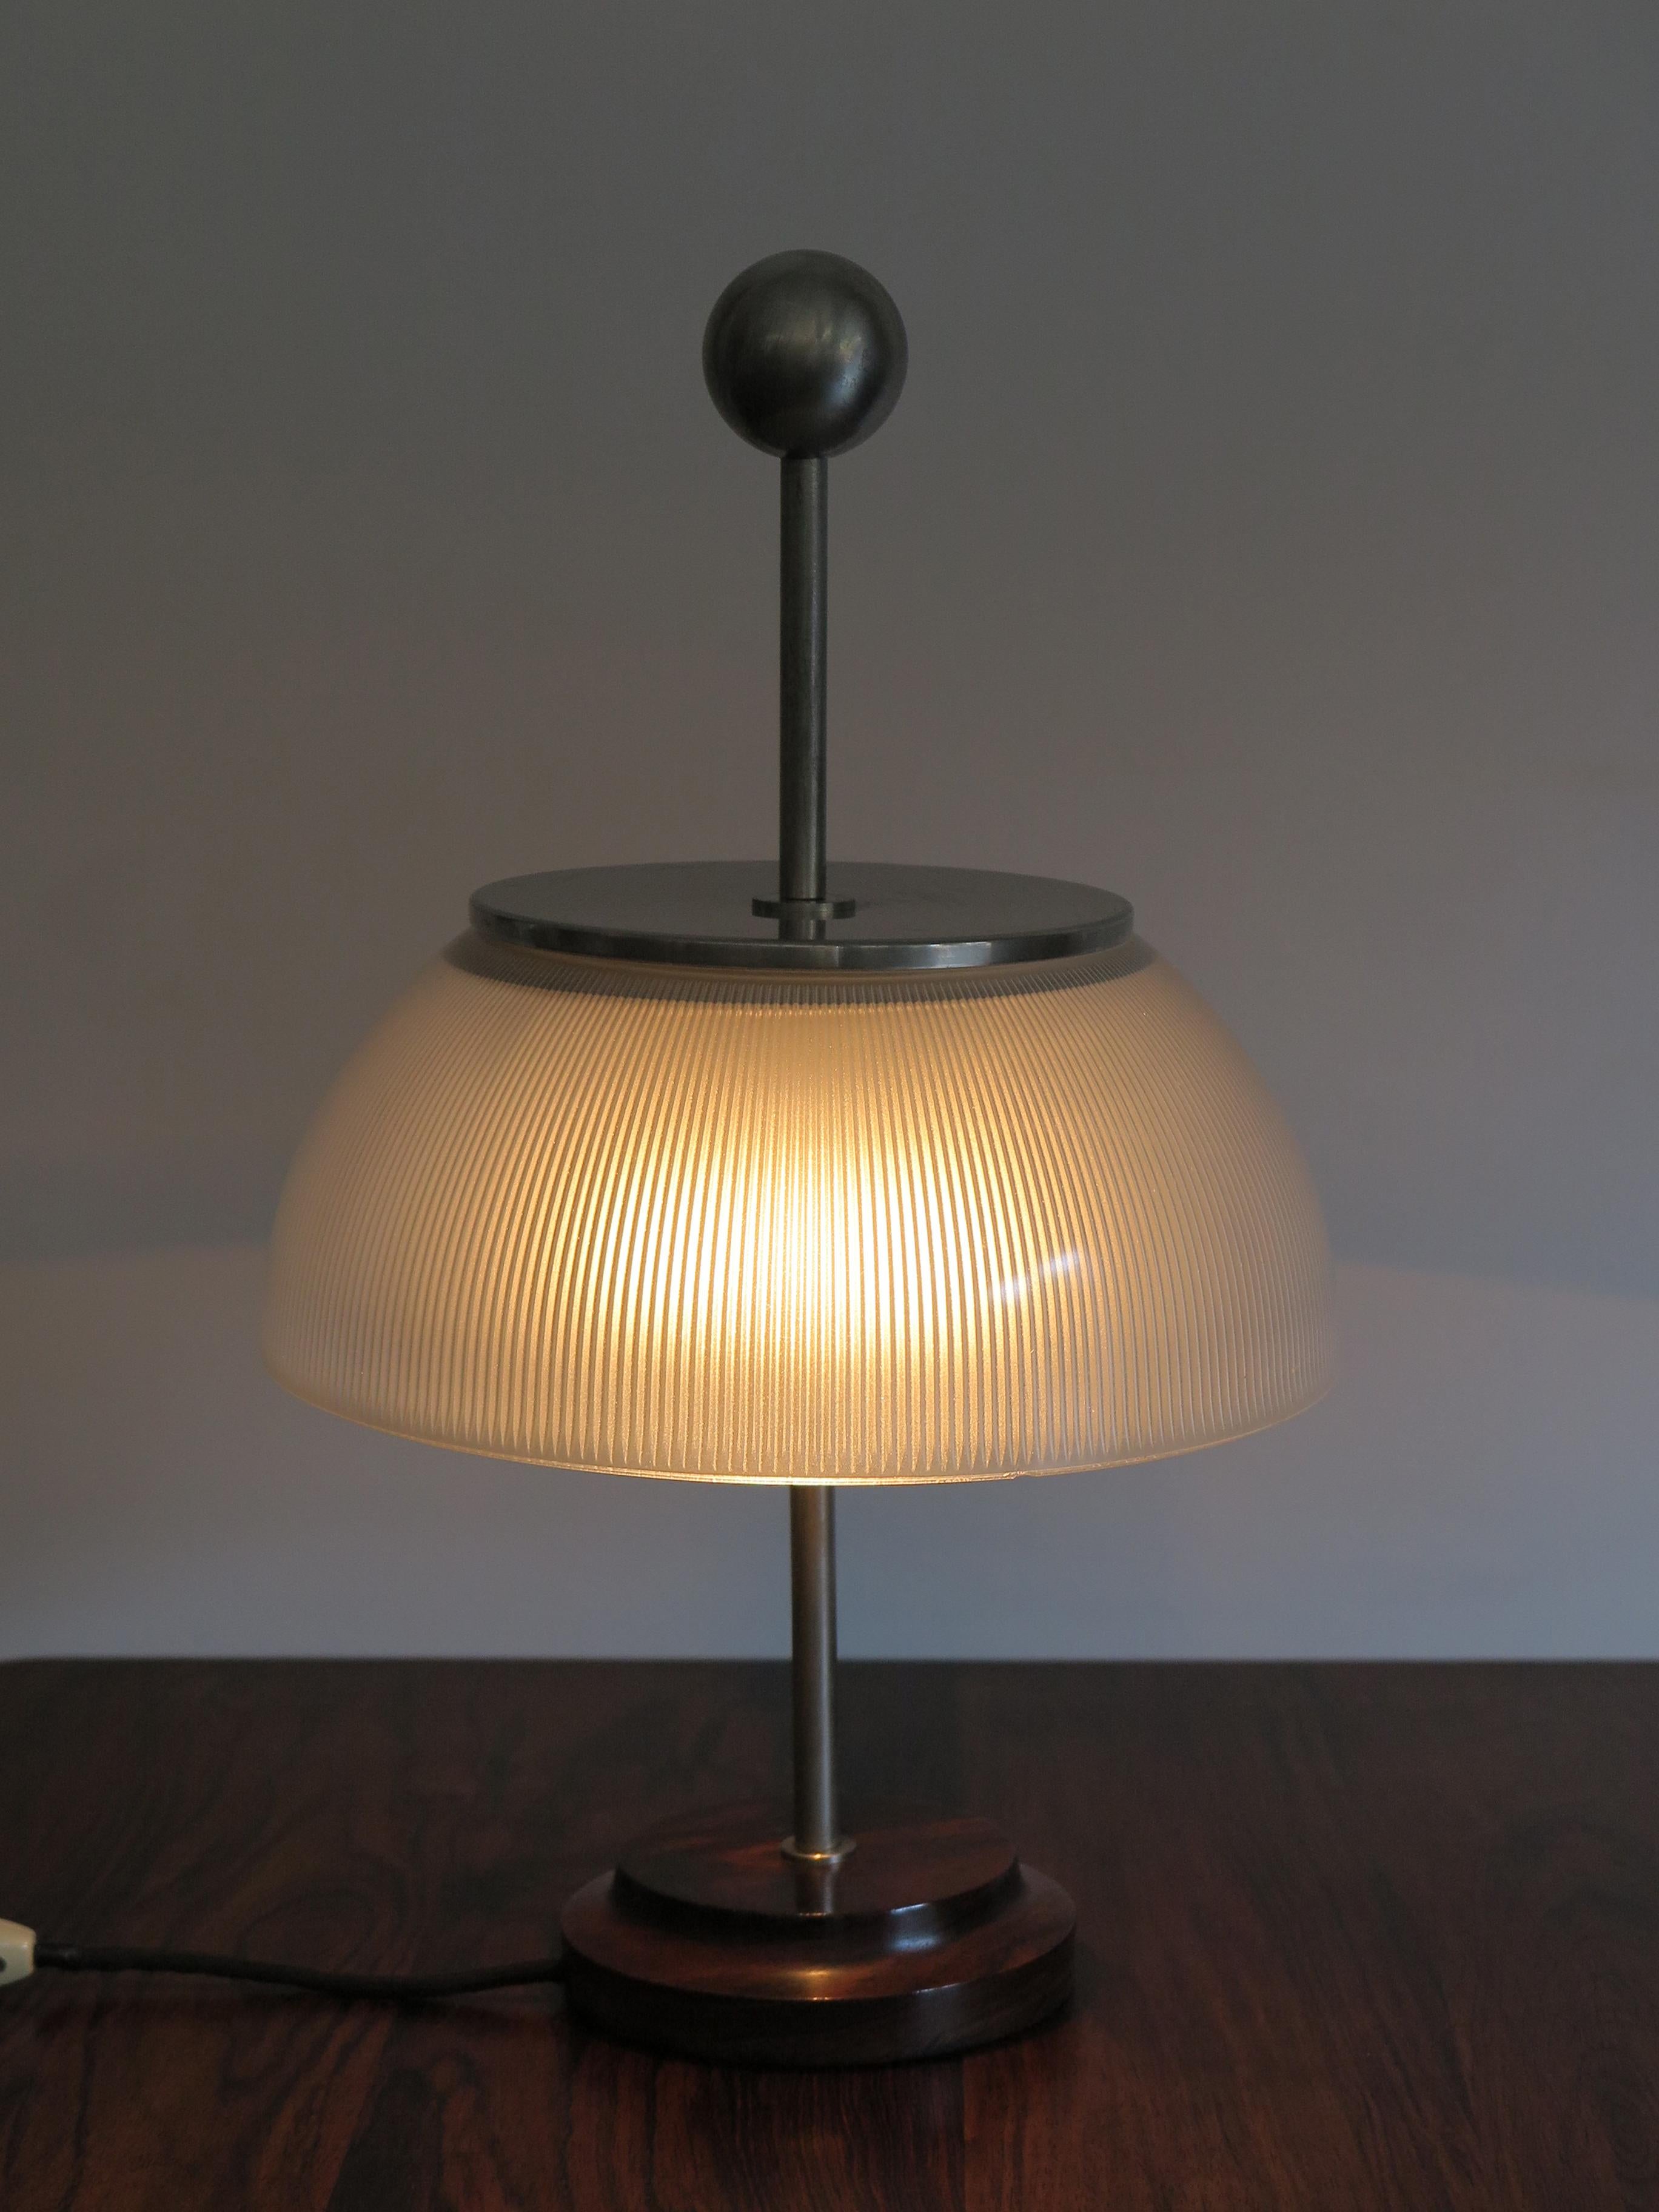 Italian table lamp model Alfa designed by Sergio Mazza for Artemide, structure and knob in matt nickel-plated brass, molded glass diffuser, rare model with wood base, 1960s
Literature:
Domus 399 (February 1963), pag. 107
Octagon 4 (January 1967),